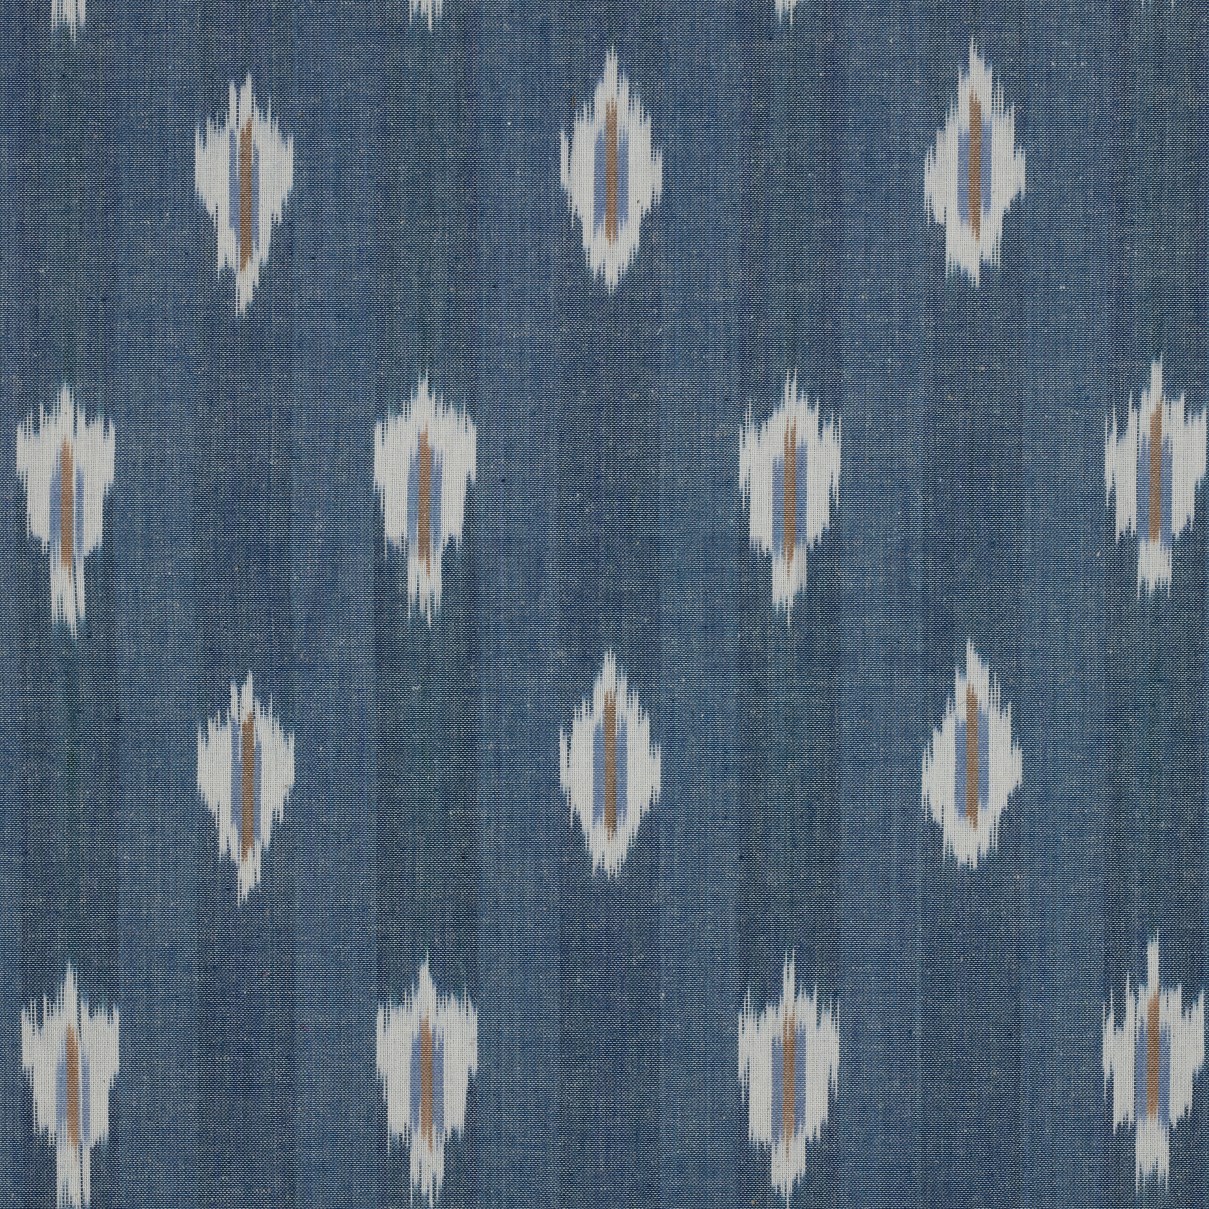 COTTON IKAT JEANS (high resolution)